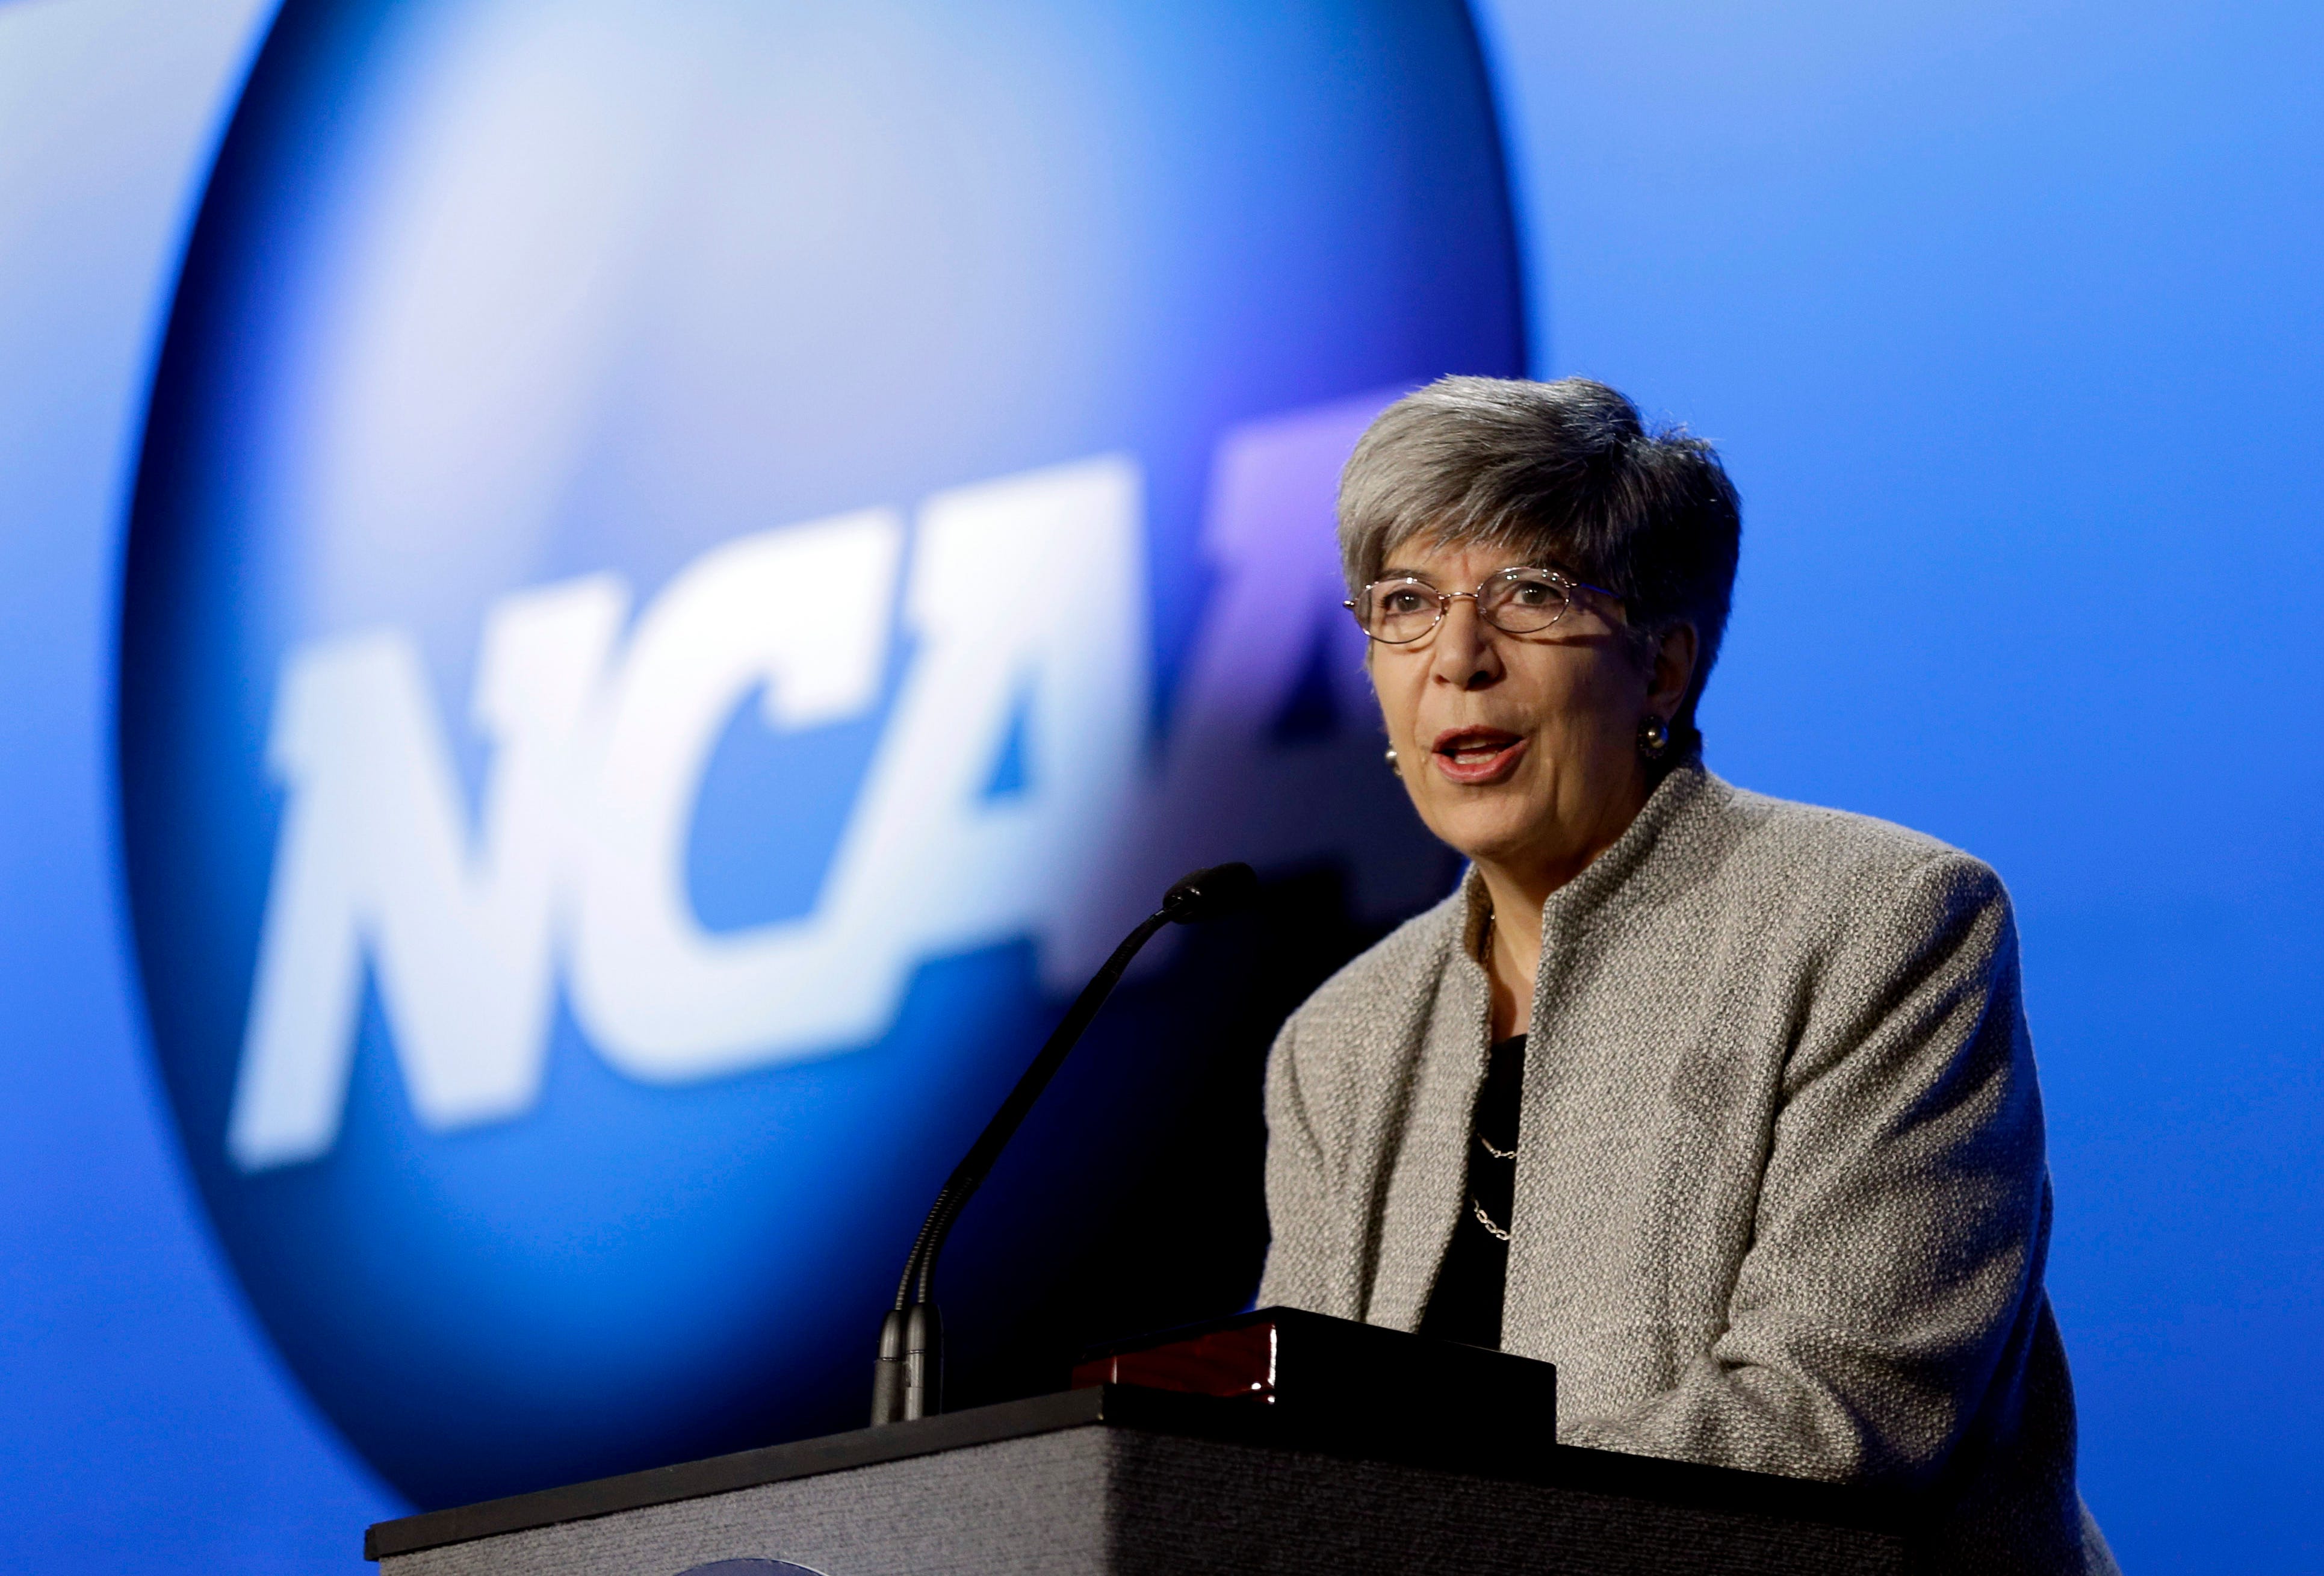 Donna Lopiano is a former coach, longtime director of women’s athletics at the University of Texas at Austin and former CEO of the Women’s Sports Foundation.